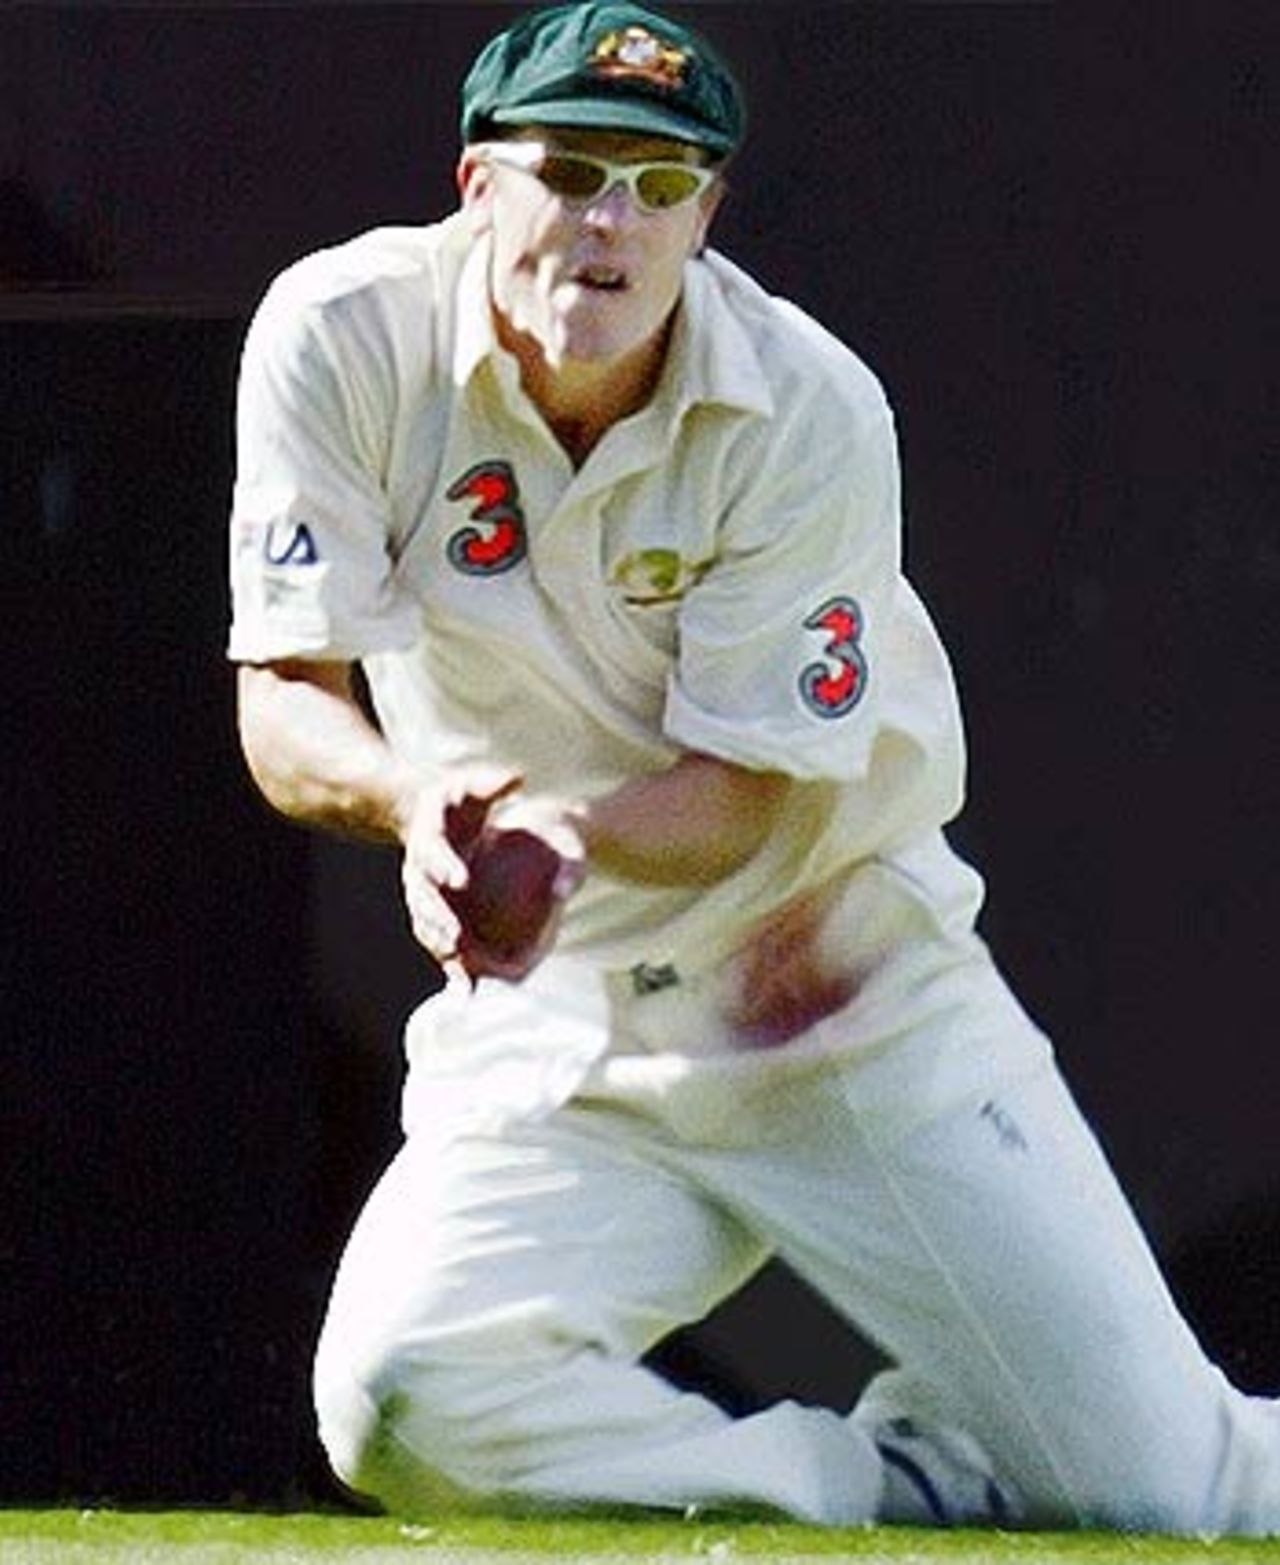 Finally, it's over. Nathan Bracken catches Virender Sehwag in the deep, Australia v India, 3rd Test, Melbourne, 1st day, December 26, 2003